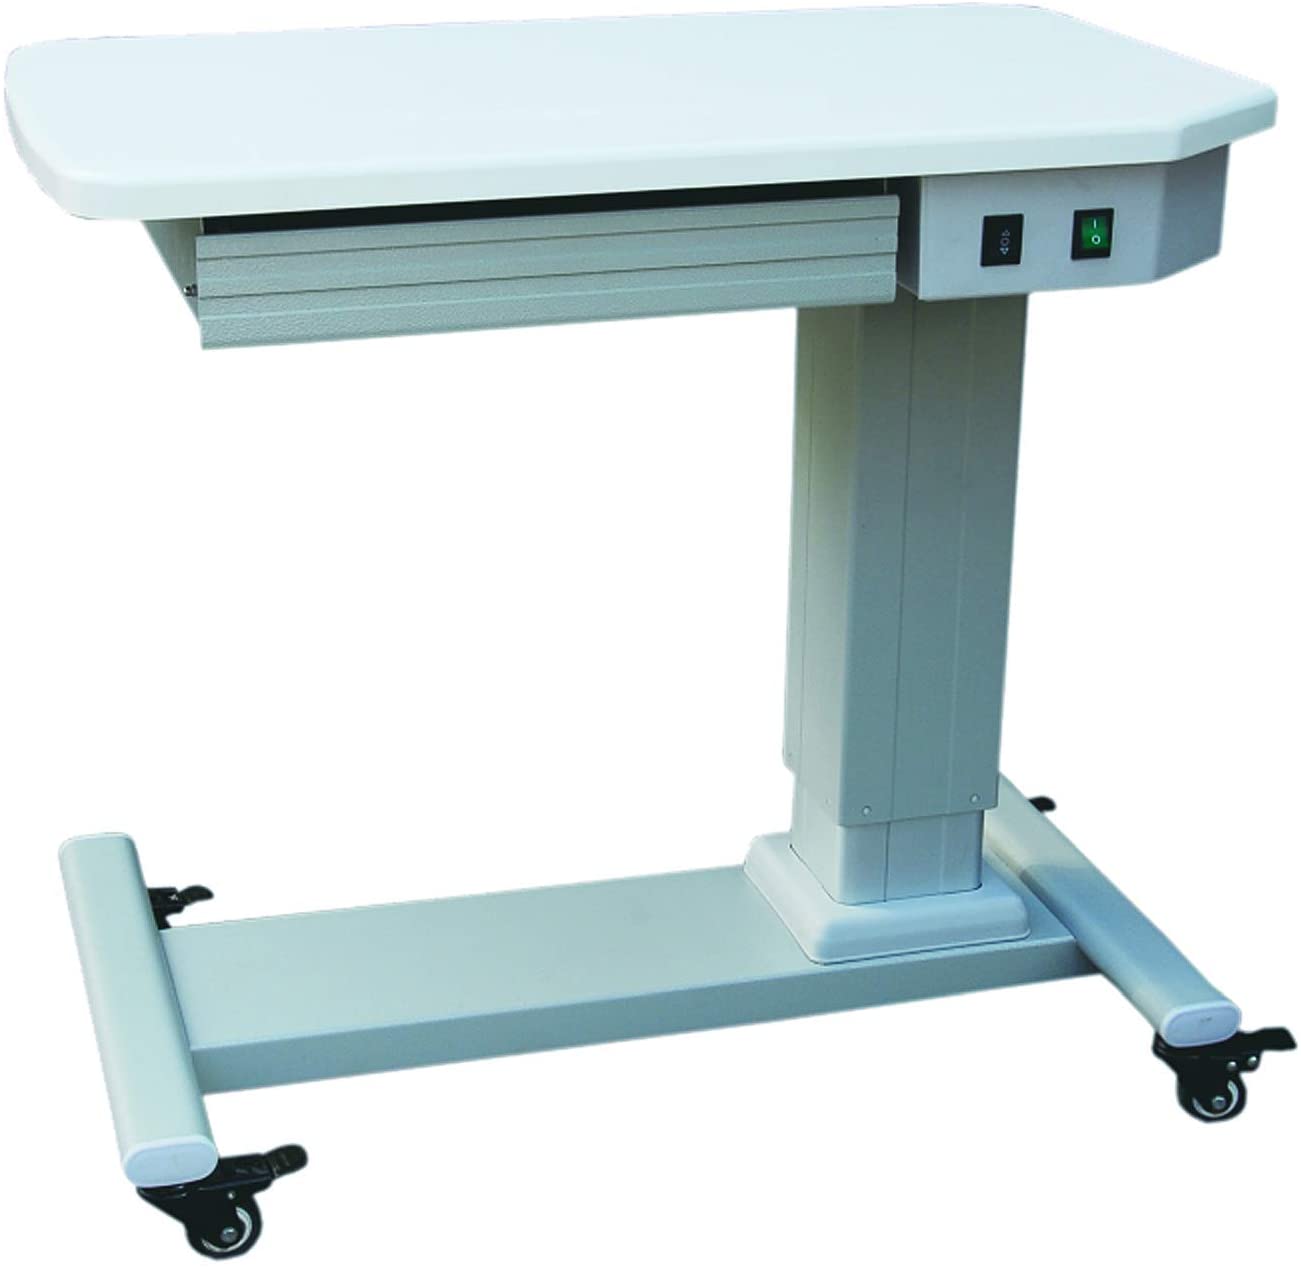 Optical Motorized 2 Instrument Power Table Ophthalmic Adjustable Two Instrument Table 31” x 19” TB-S330 - Lunar Health Store